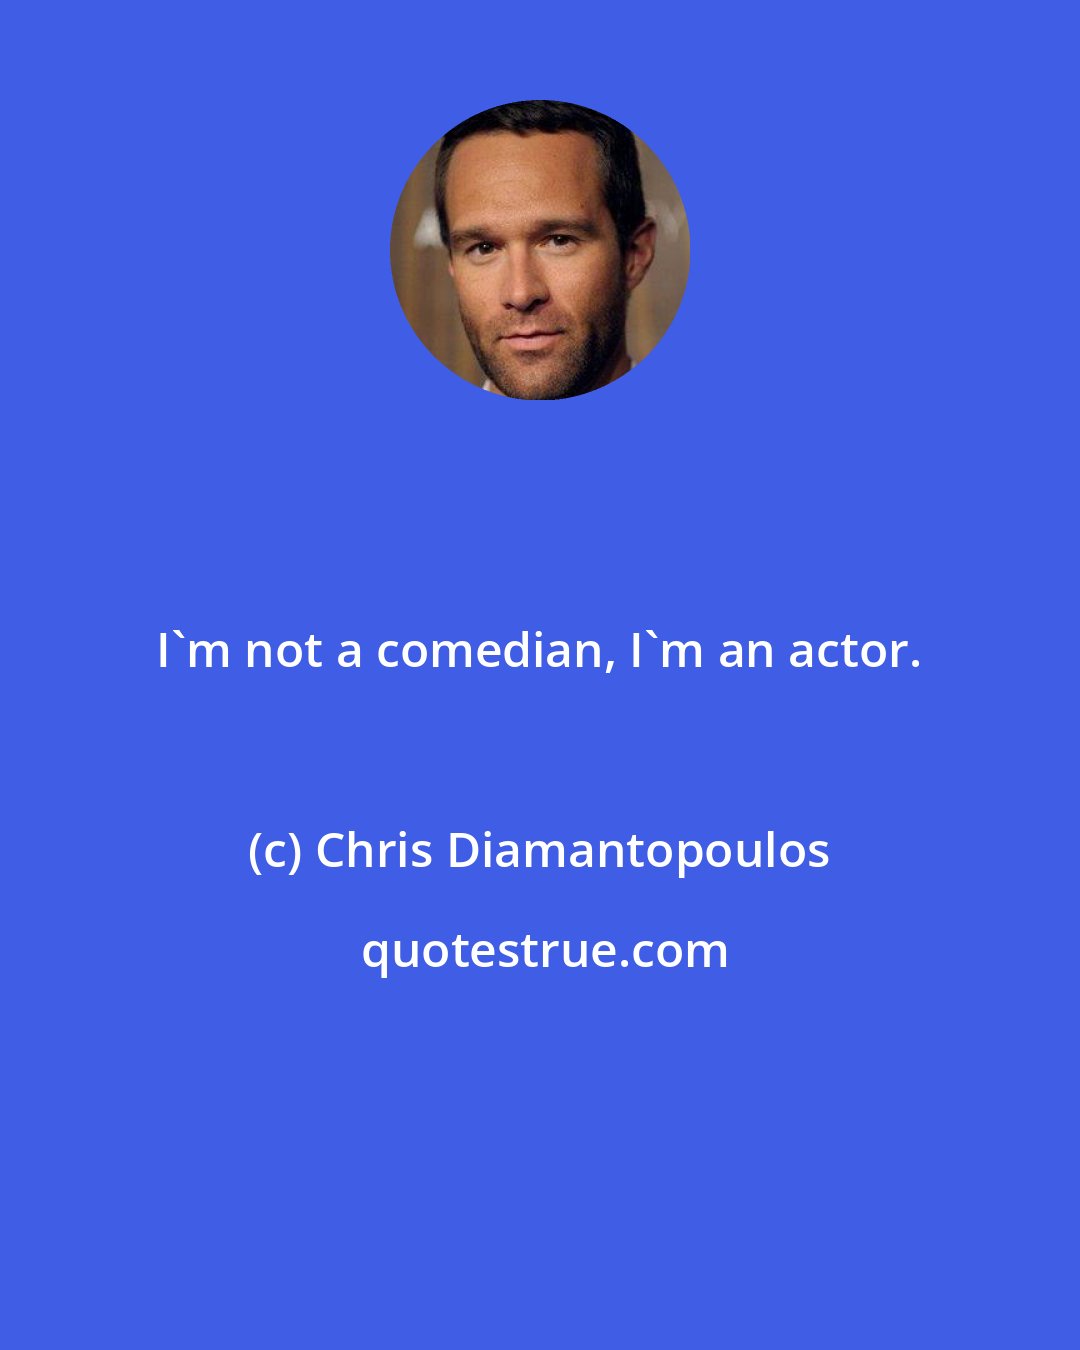 Chris Diamantopoulos: I'm not a comedian, I'm an actor.